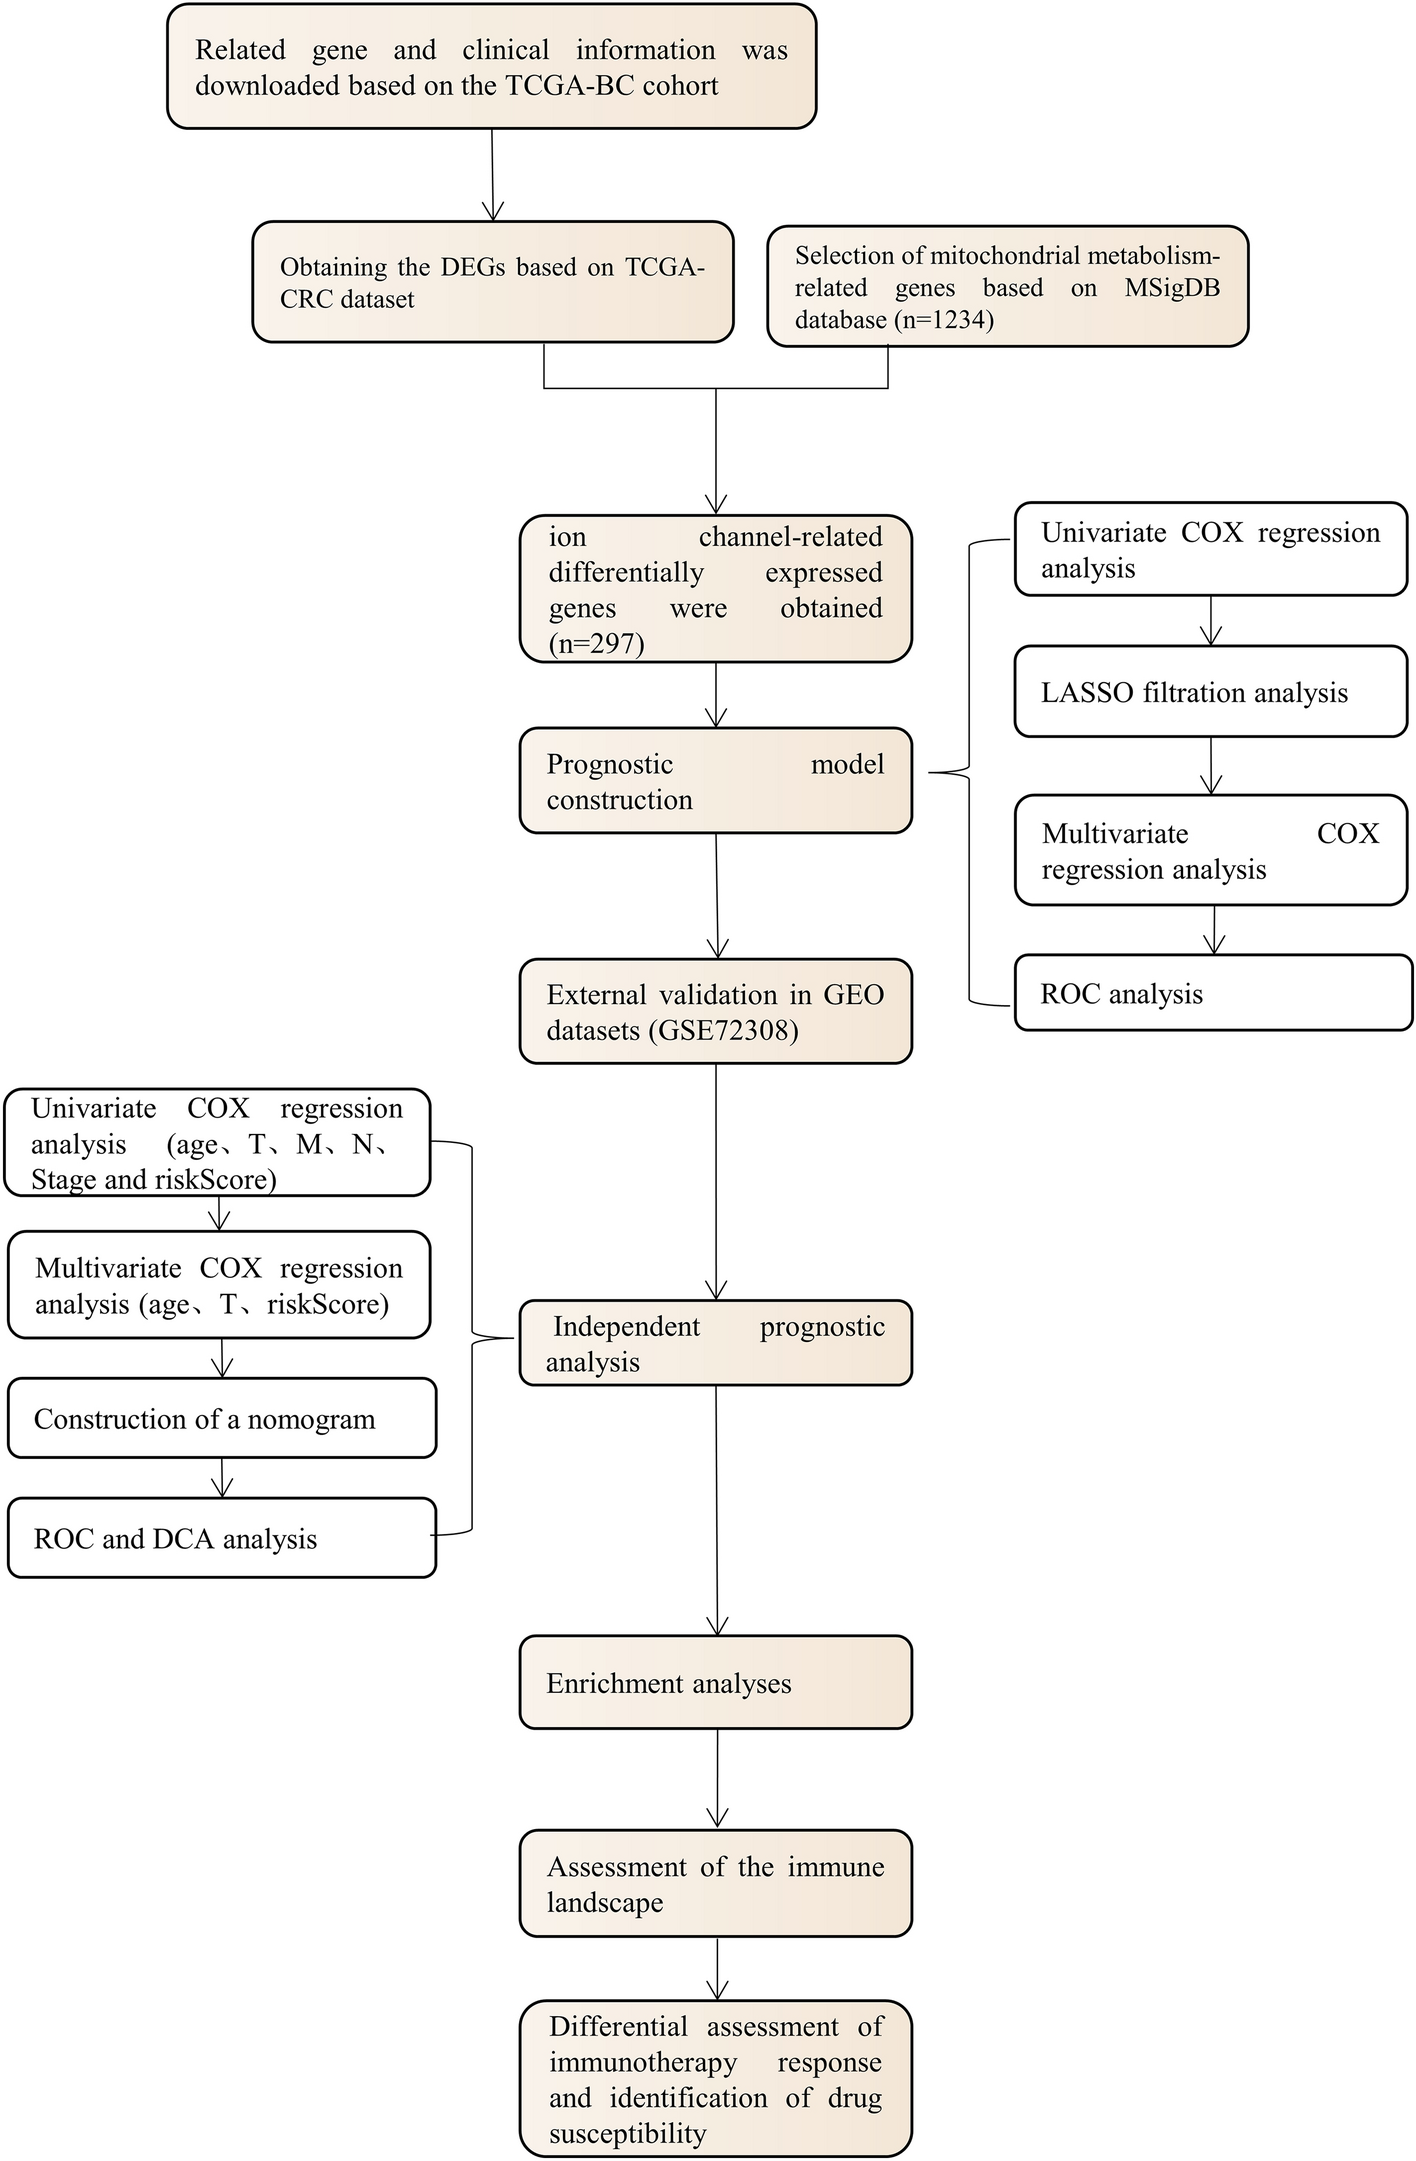 Construction and Analysis of a Mitochondrial Metabolism-Related Prognostic Model for Breast Cancer to Evaluate Survival and Immunotherapy